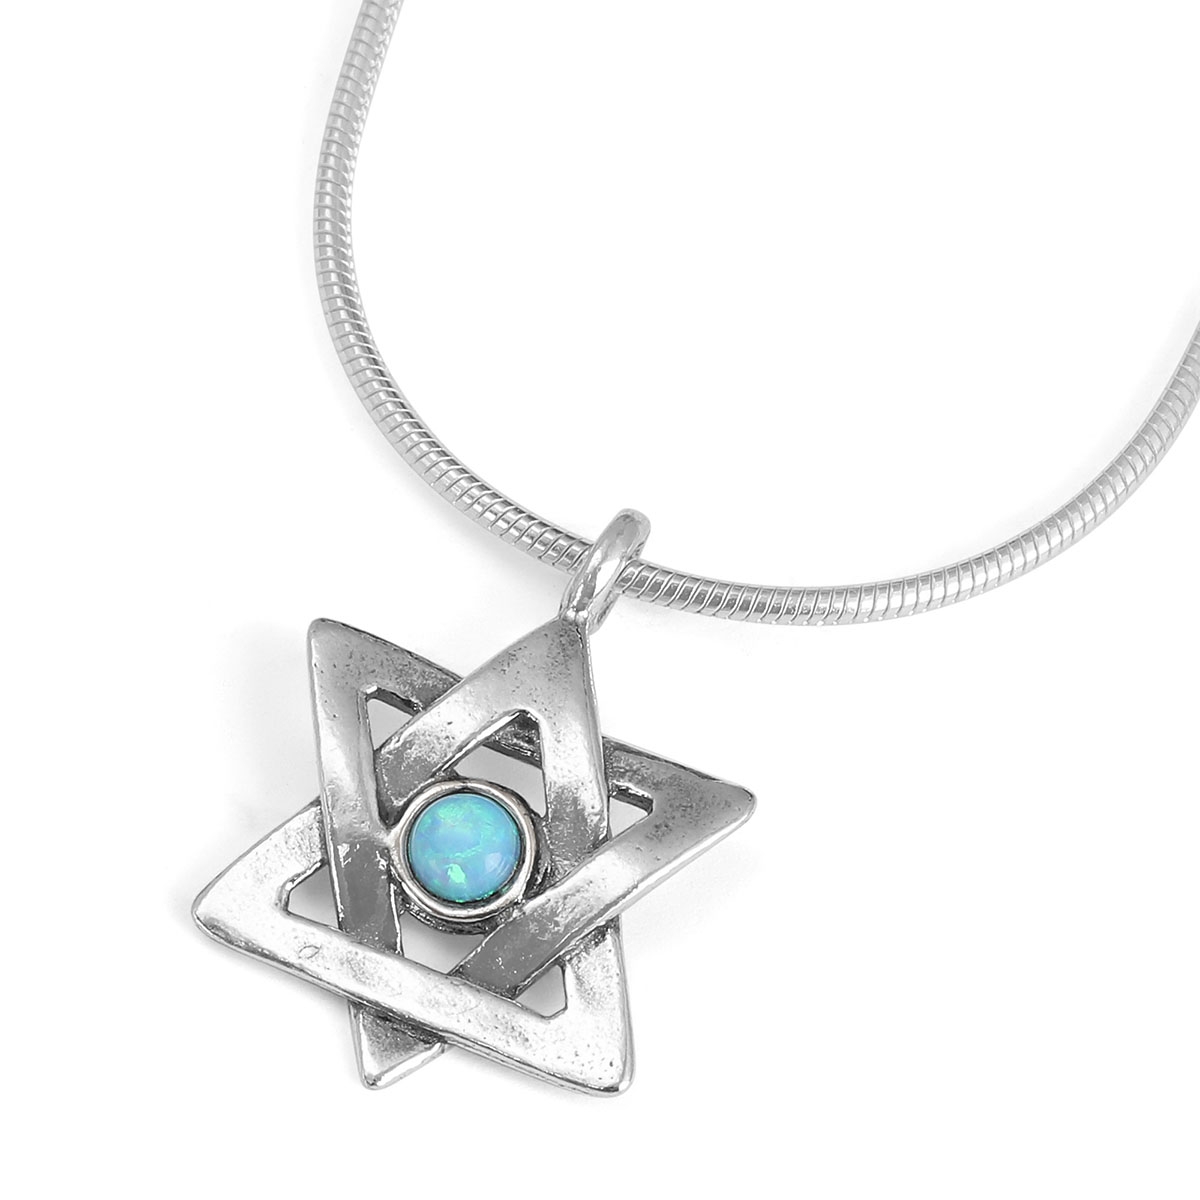 Sterling Silver Star of David Necklace with Opal Center - 1